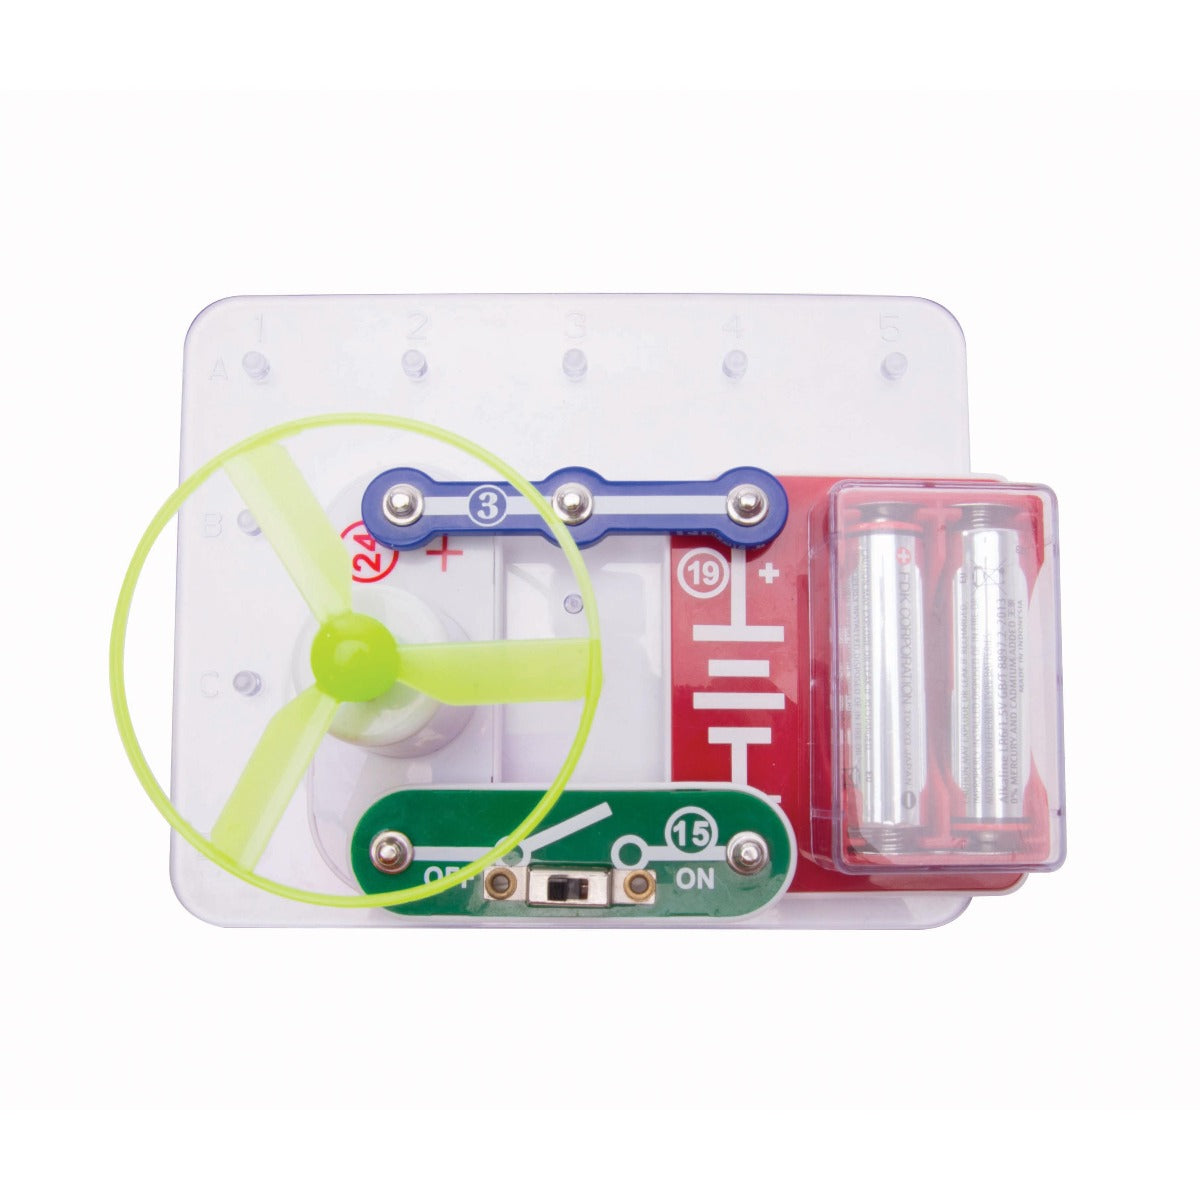 Discovery Zone 3 In 1 Electrical Circuit Kit